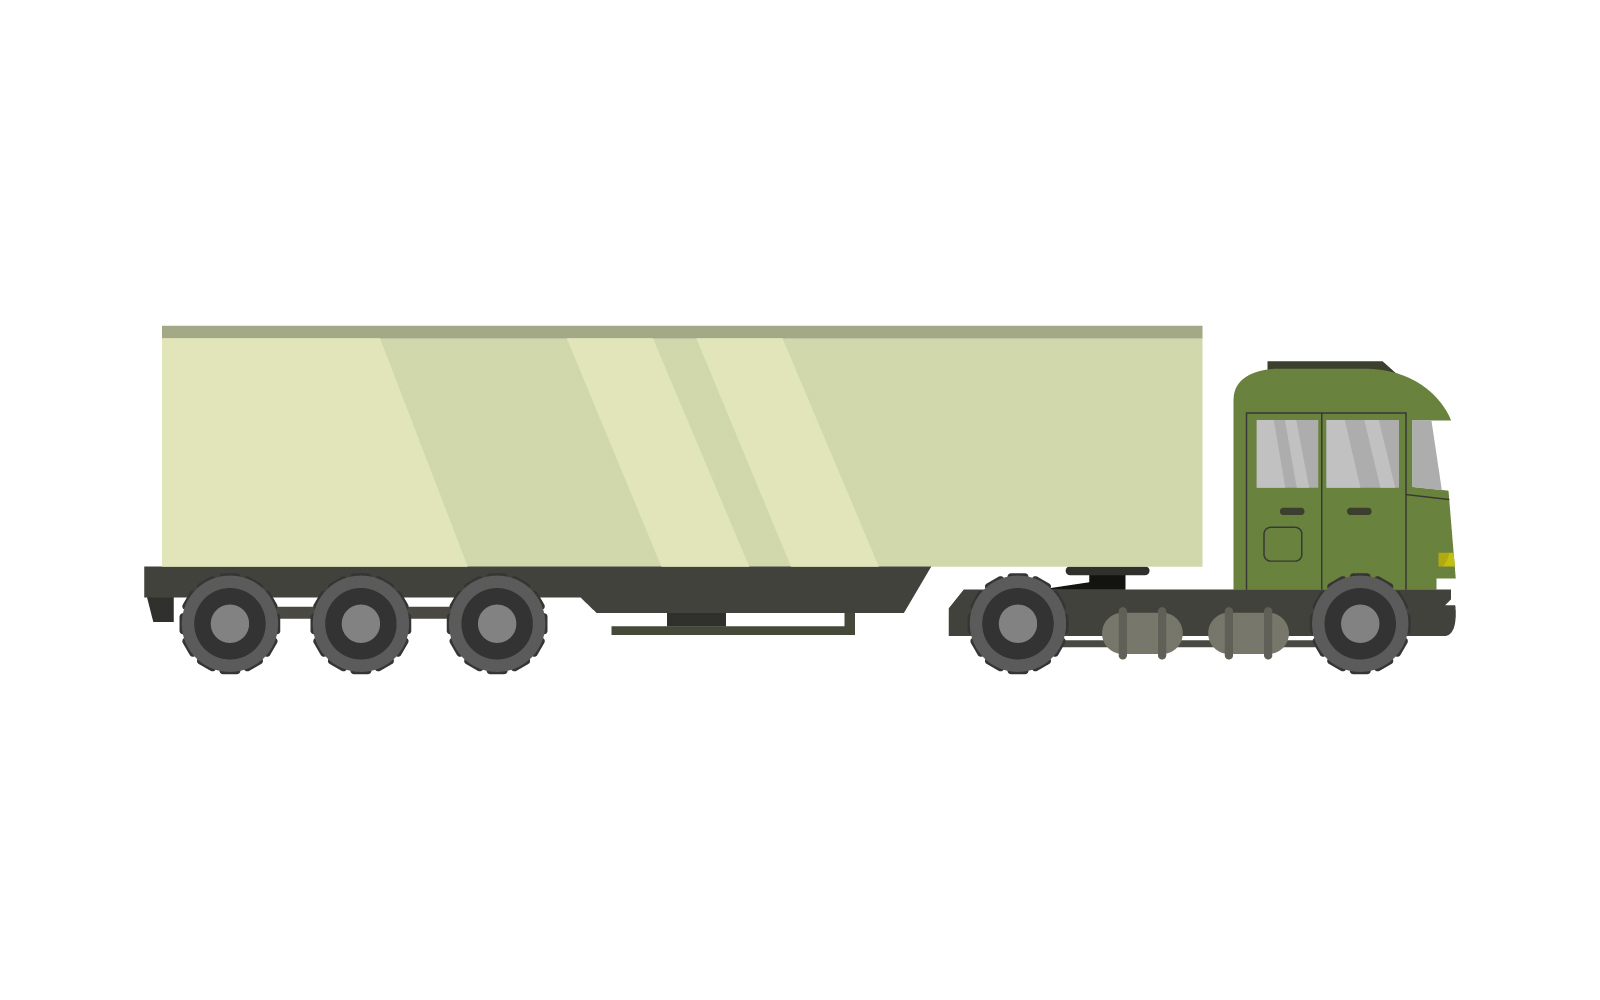 Truck illustrated in vector on white background